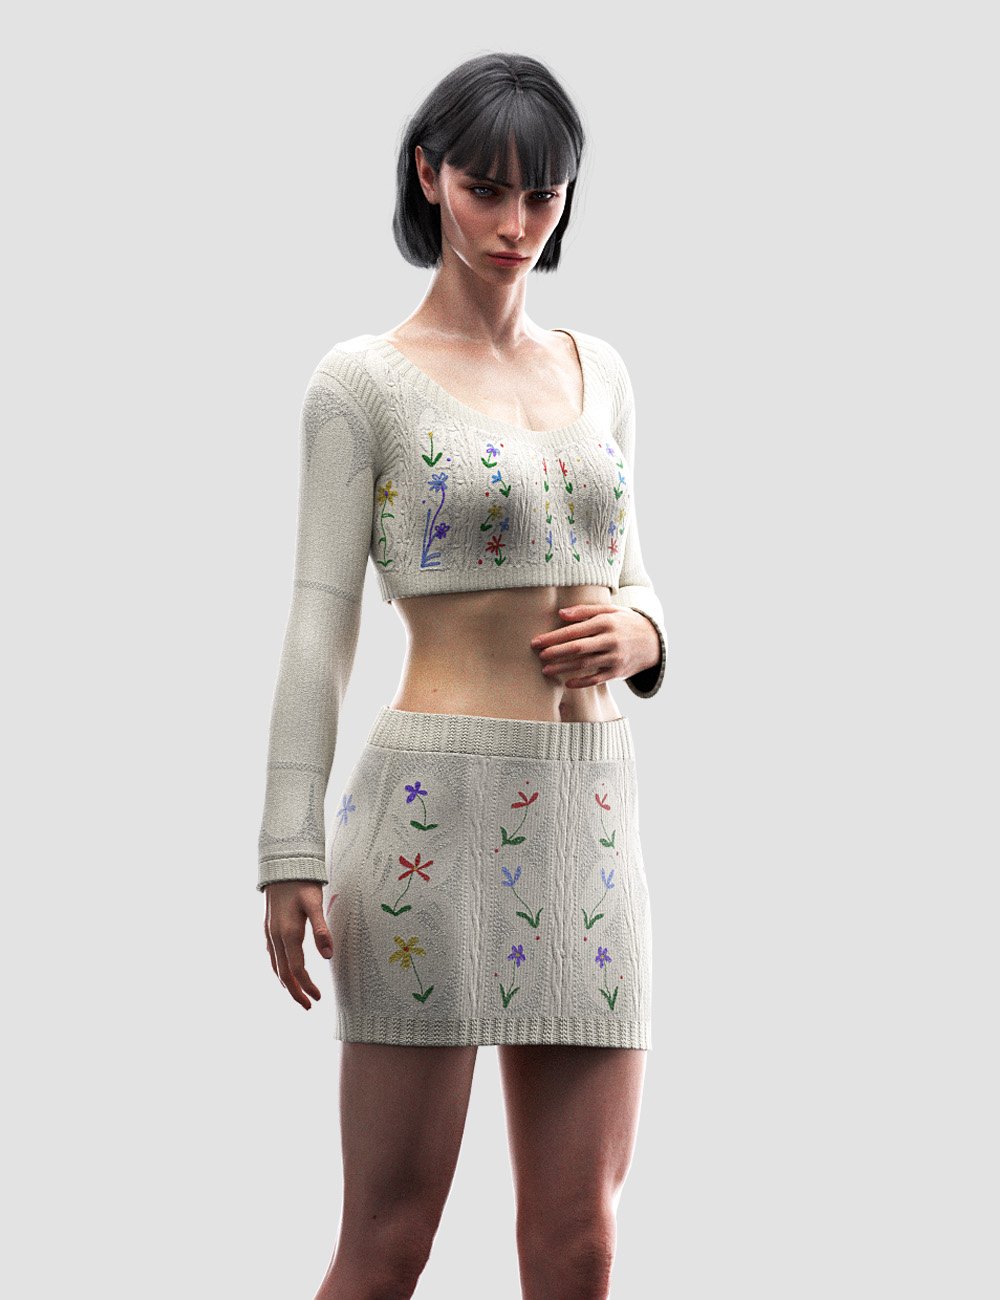 dForce Rose Knit Outfit Textures by: Romeo, 3D Models by Daz 3D